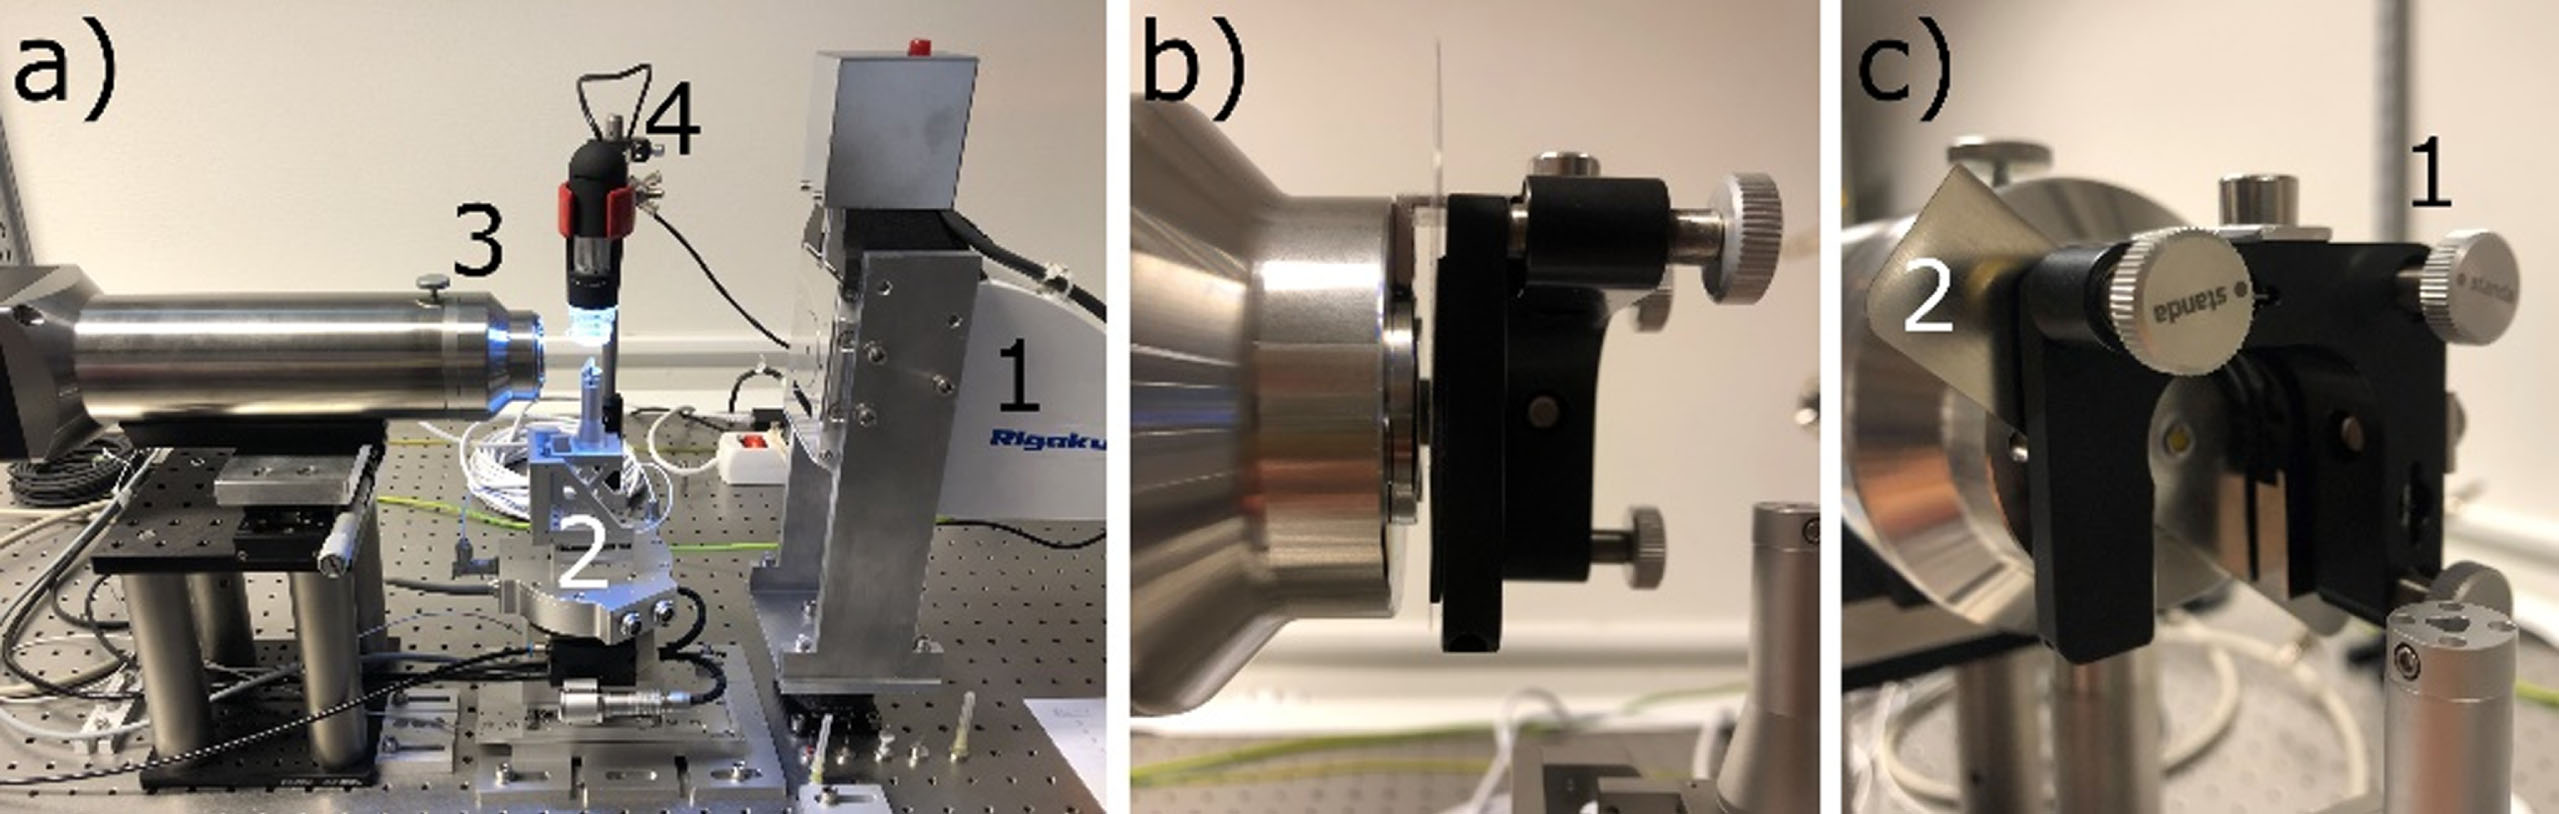 a) Photo of the tomography setup. From right to left: 1 - source, 2 - sample stage, 3 - high-resolution scintillator detector, 4 - top view USB microscope for monitoring. b) and c) photo of the scintillator mount attached to the objective lens without build-in scintillator: 1 - micrometer screws of kinematic mount, 2 – magnetically attachable scintillator carrier plate with pinhole. Note that the picture in a) shows the detector with a commercial scintillator.